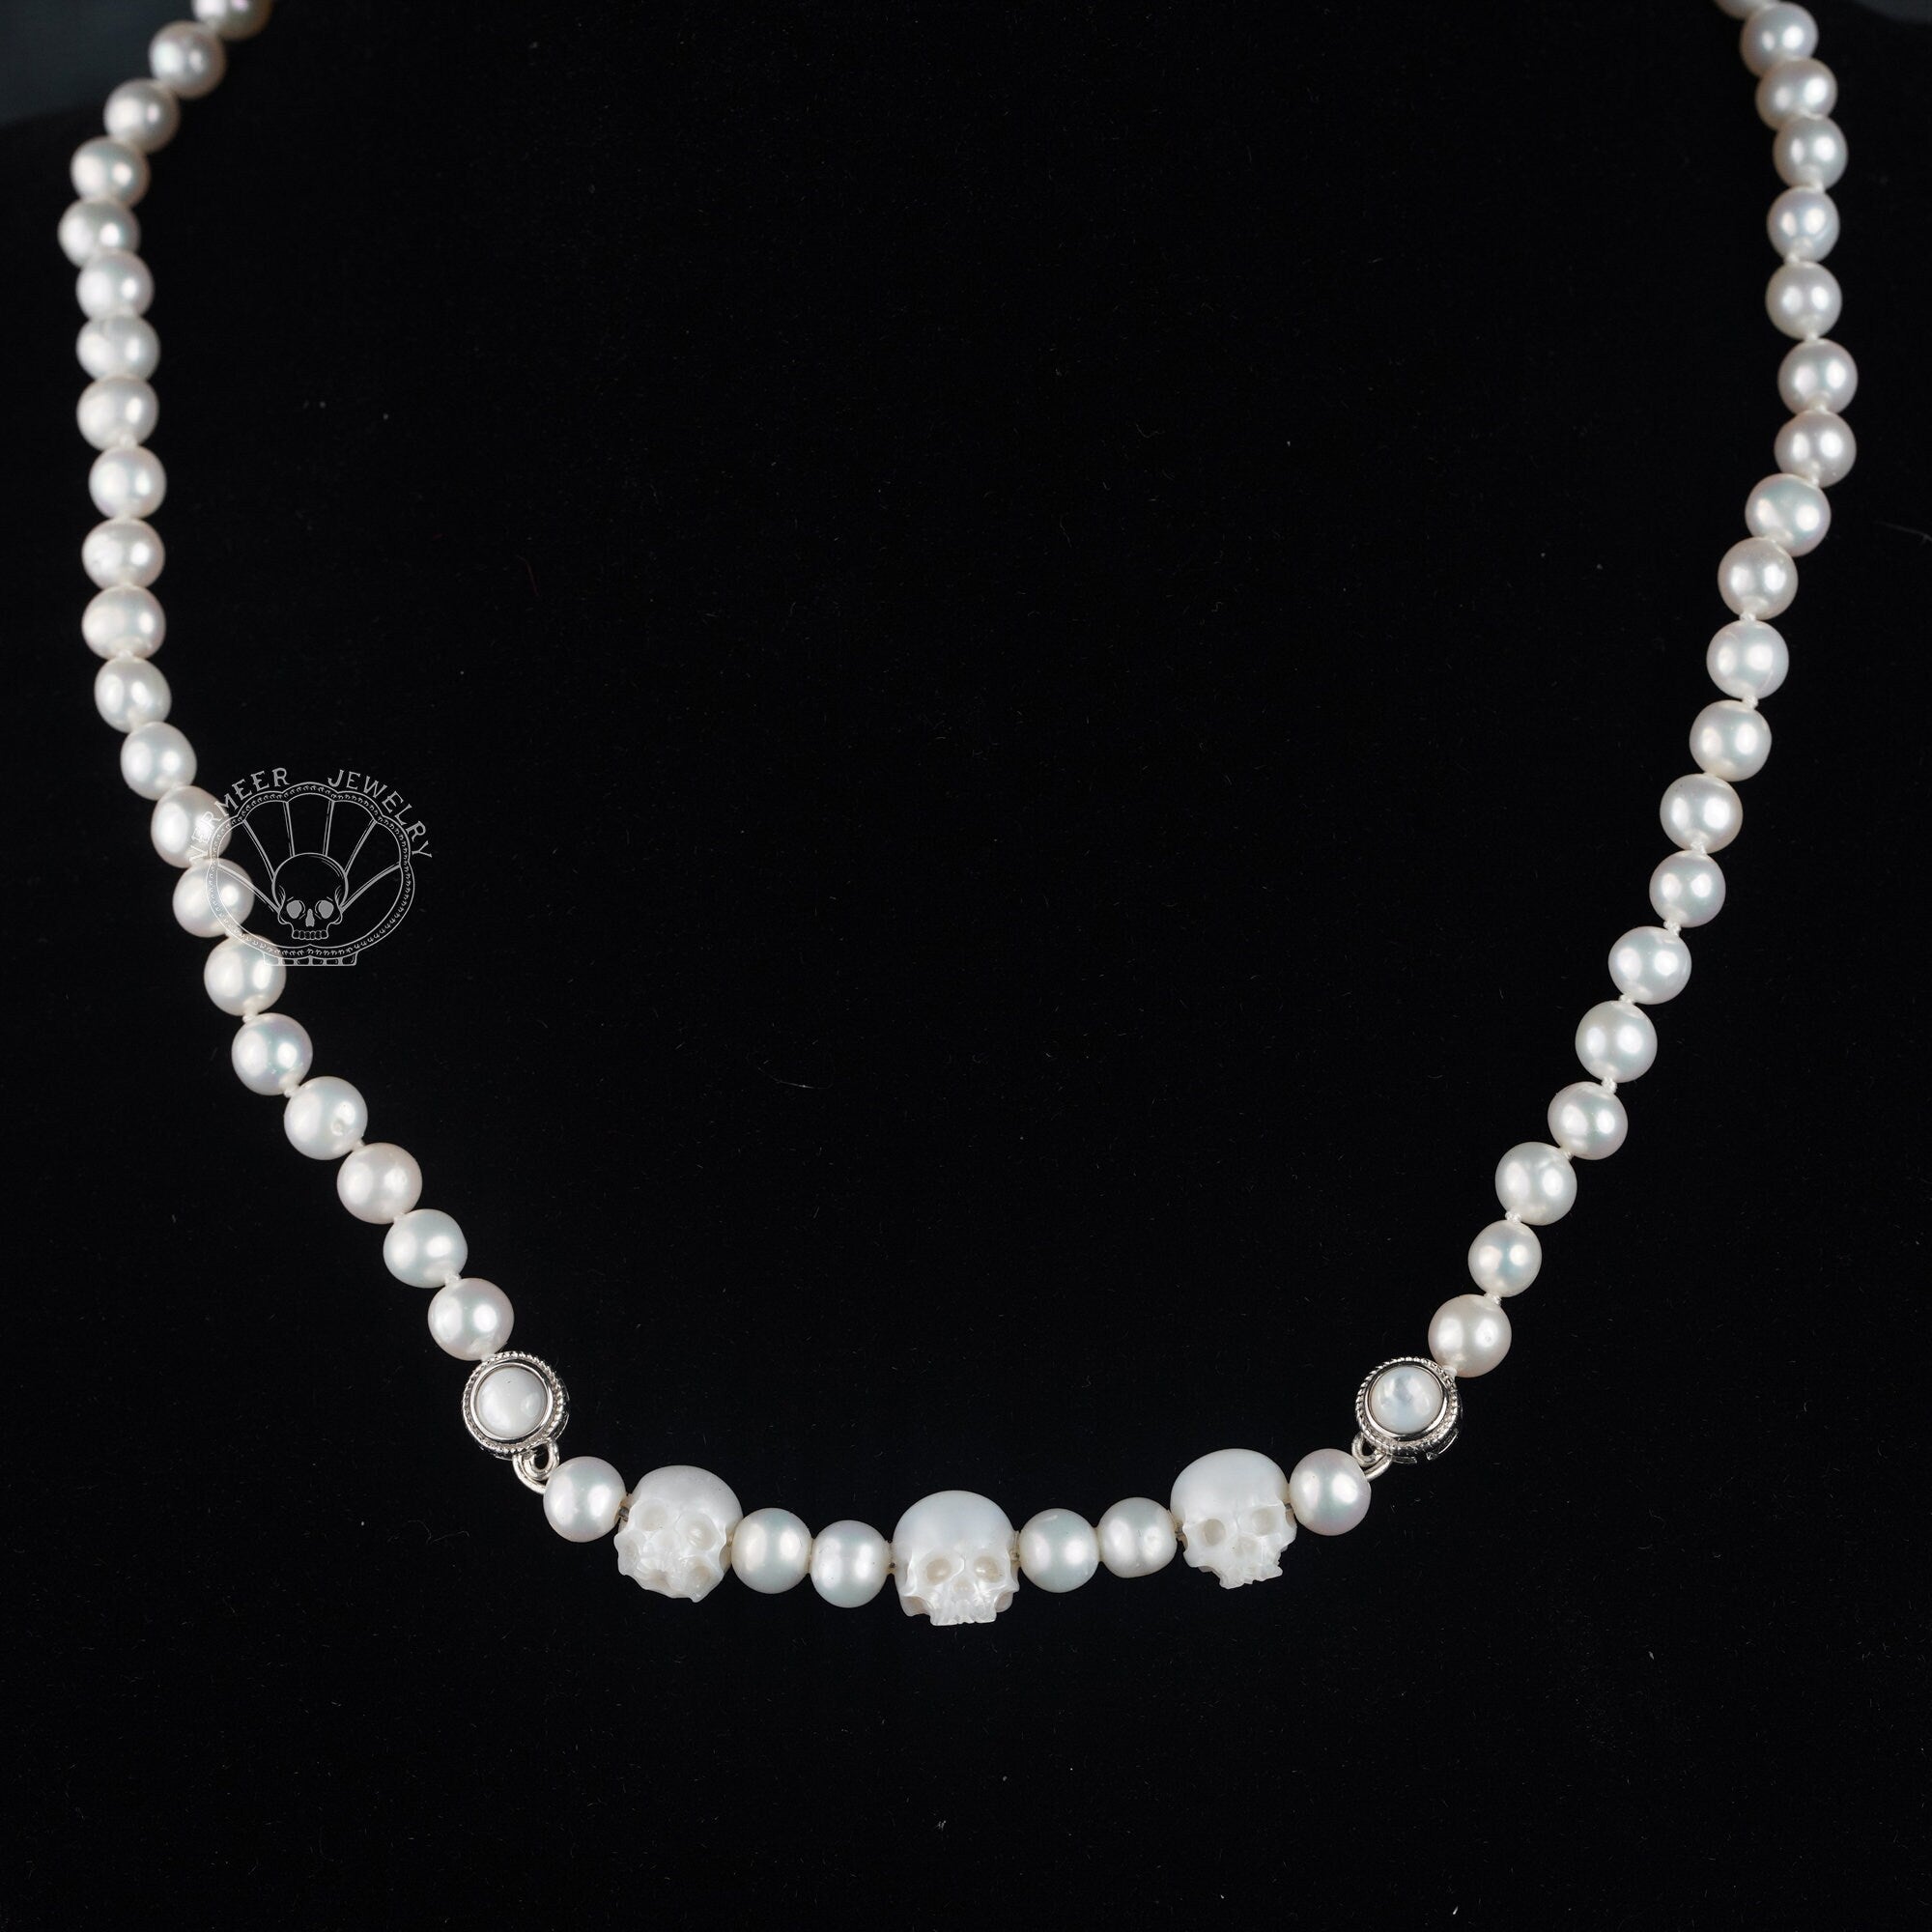 wedding necklace skull carved pearl necklace gothic freshwater Pearl skull jewelry for Bridal